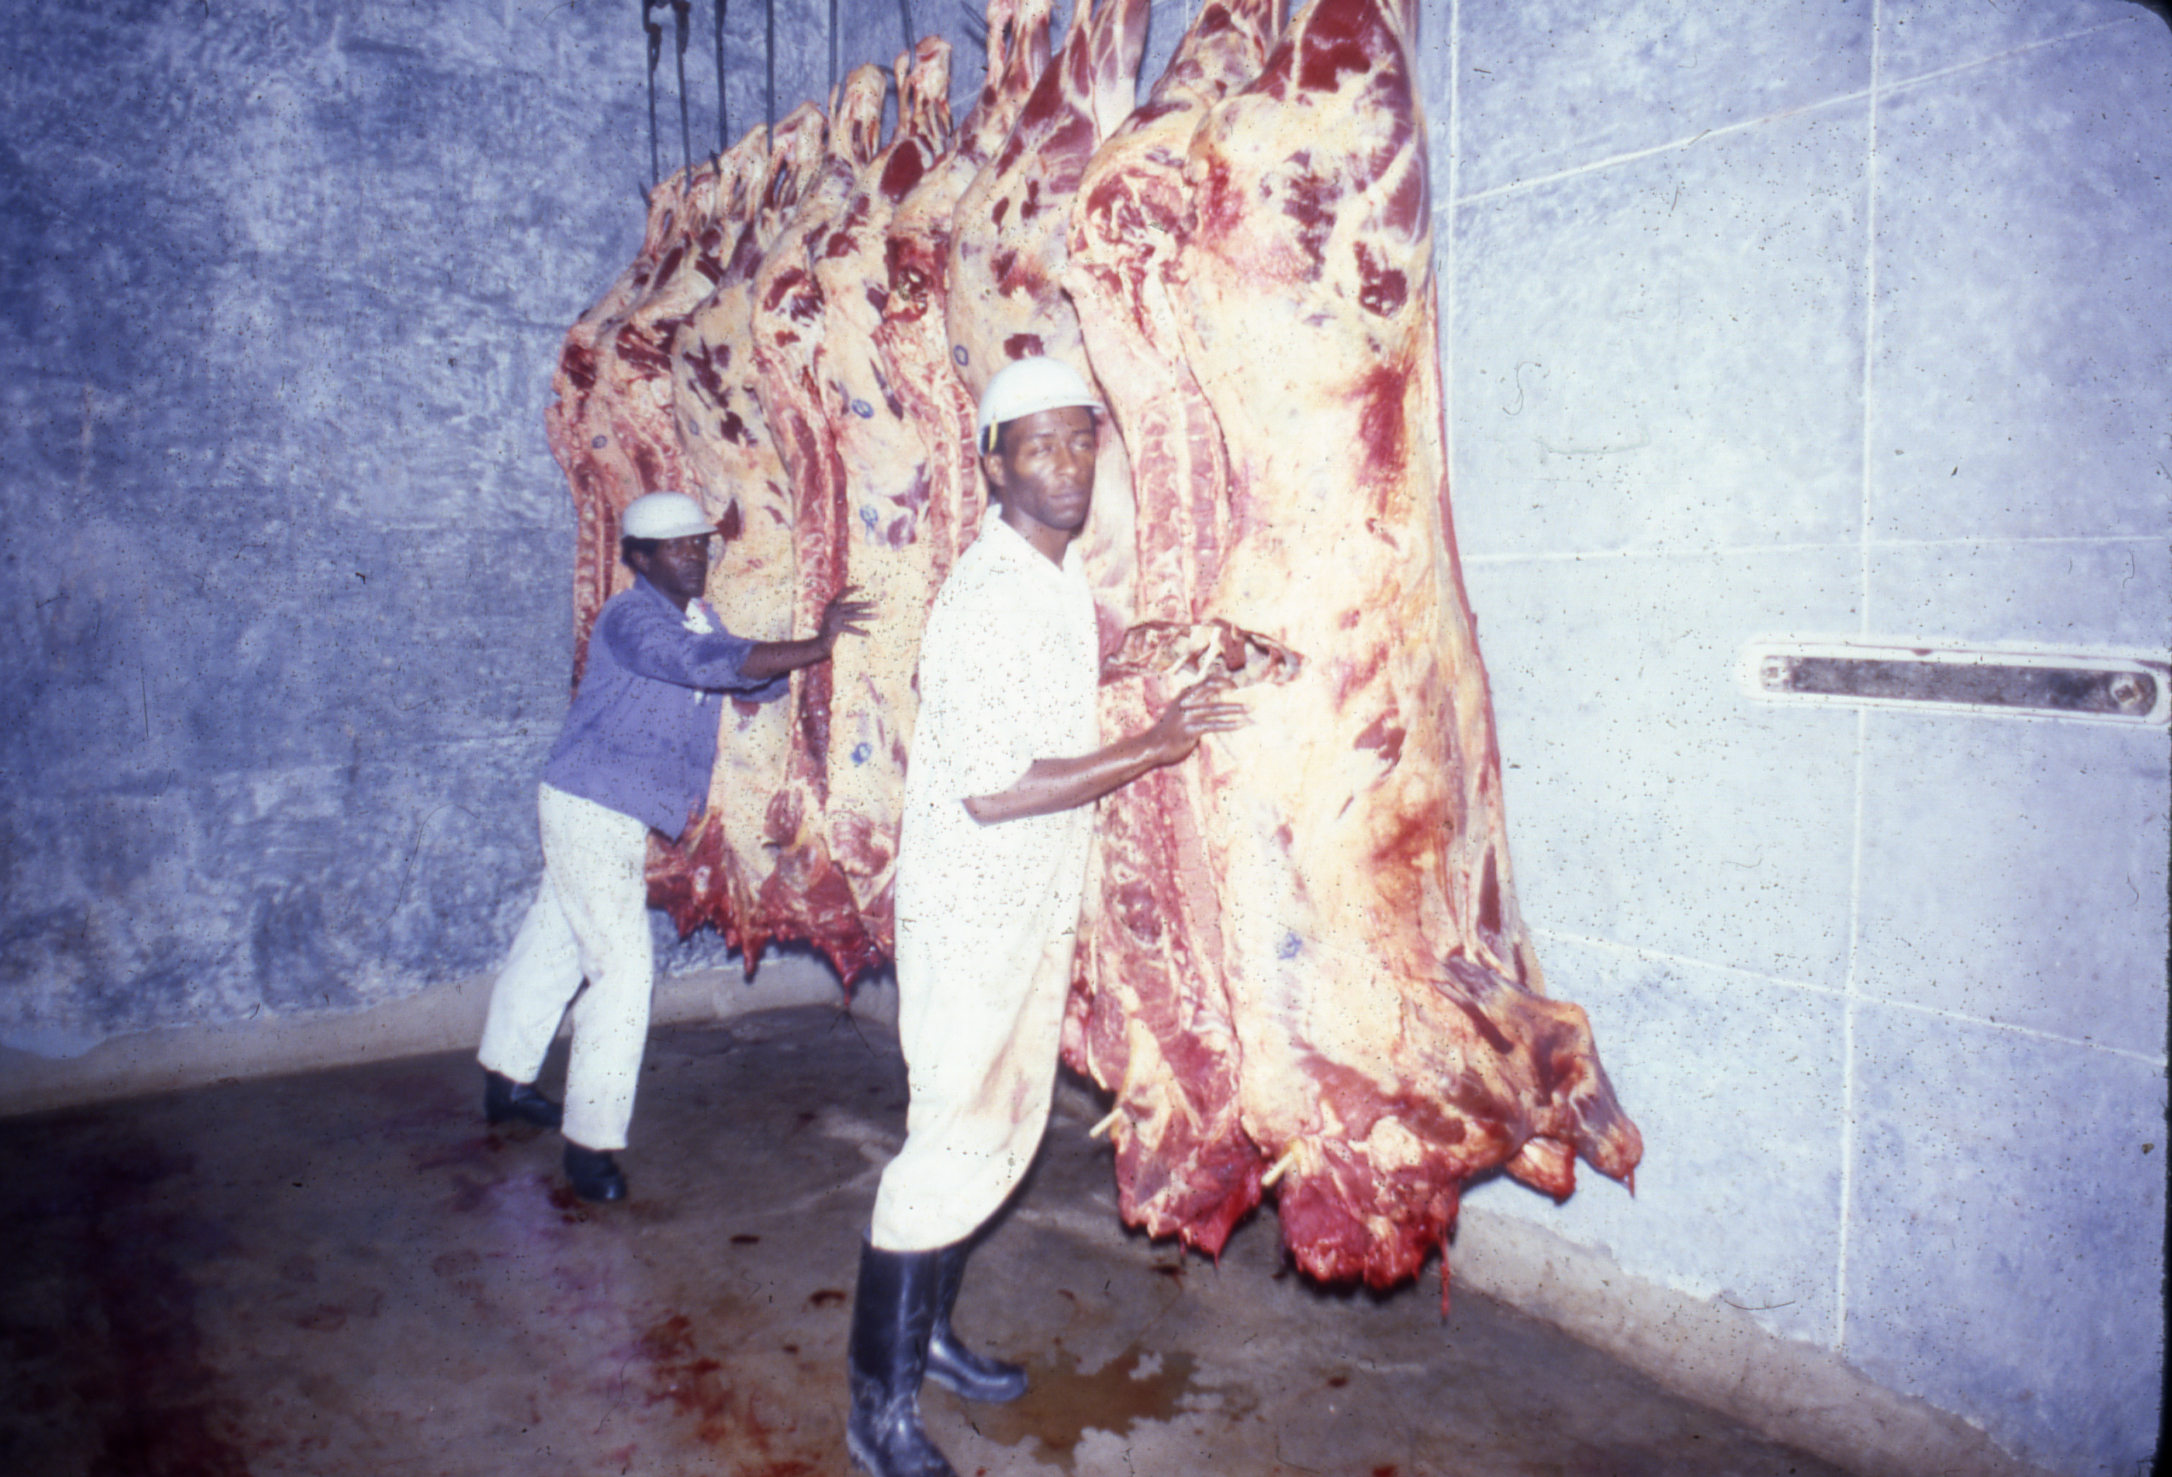 Slide 5: This shows African American men at Florida State Prison. They are wearing white clothes and are surrounded by carcasses of cattle hanging from large hooks.